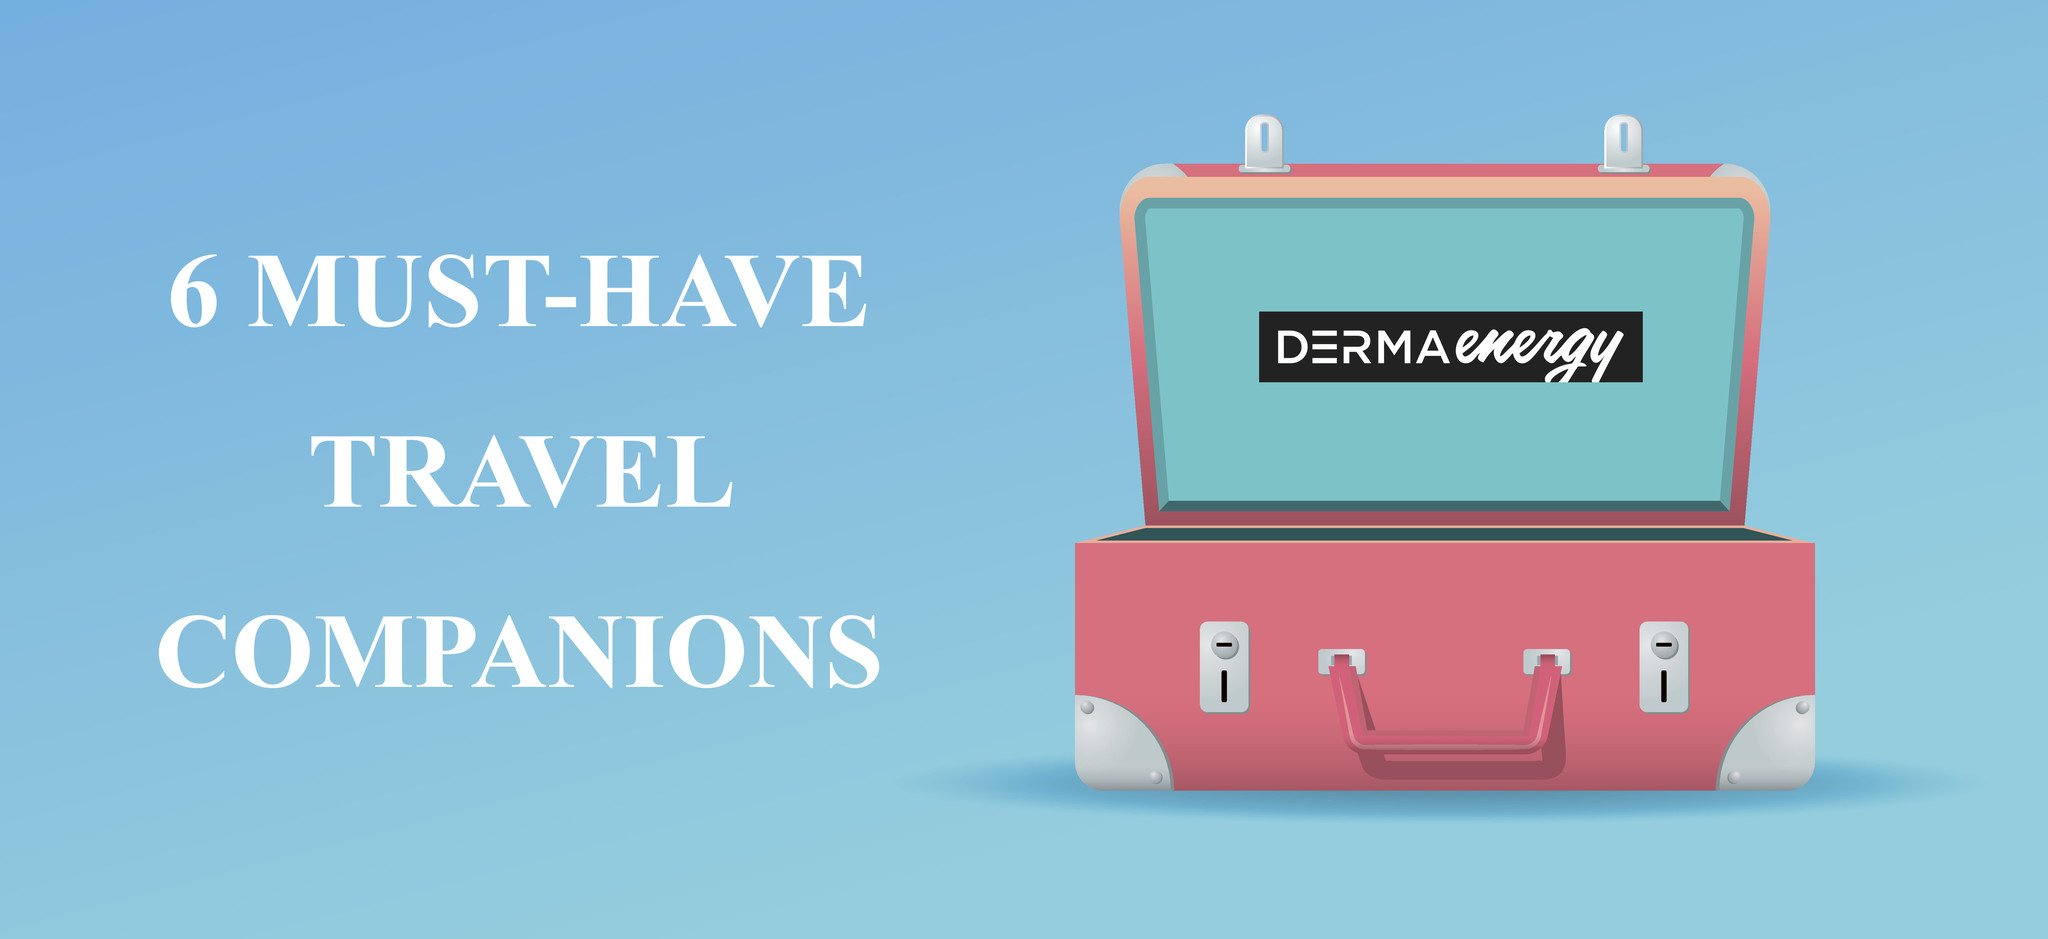 6 MUST-HAVE TRAVEL COMPANIONS